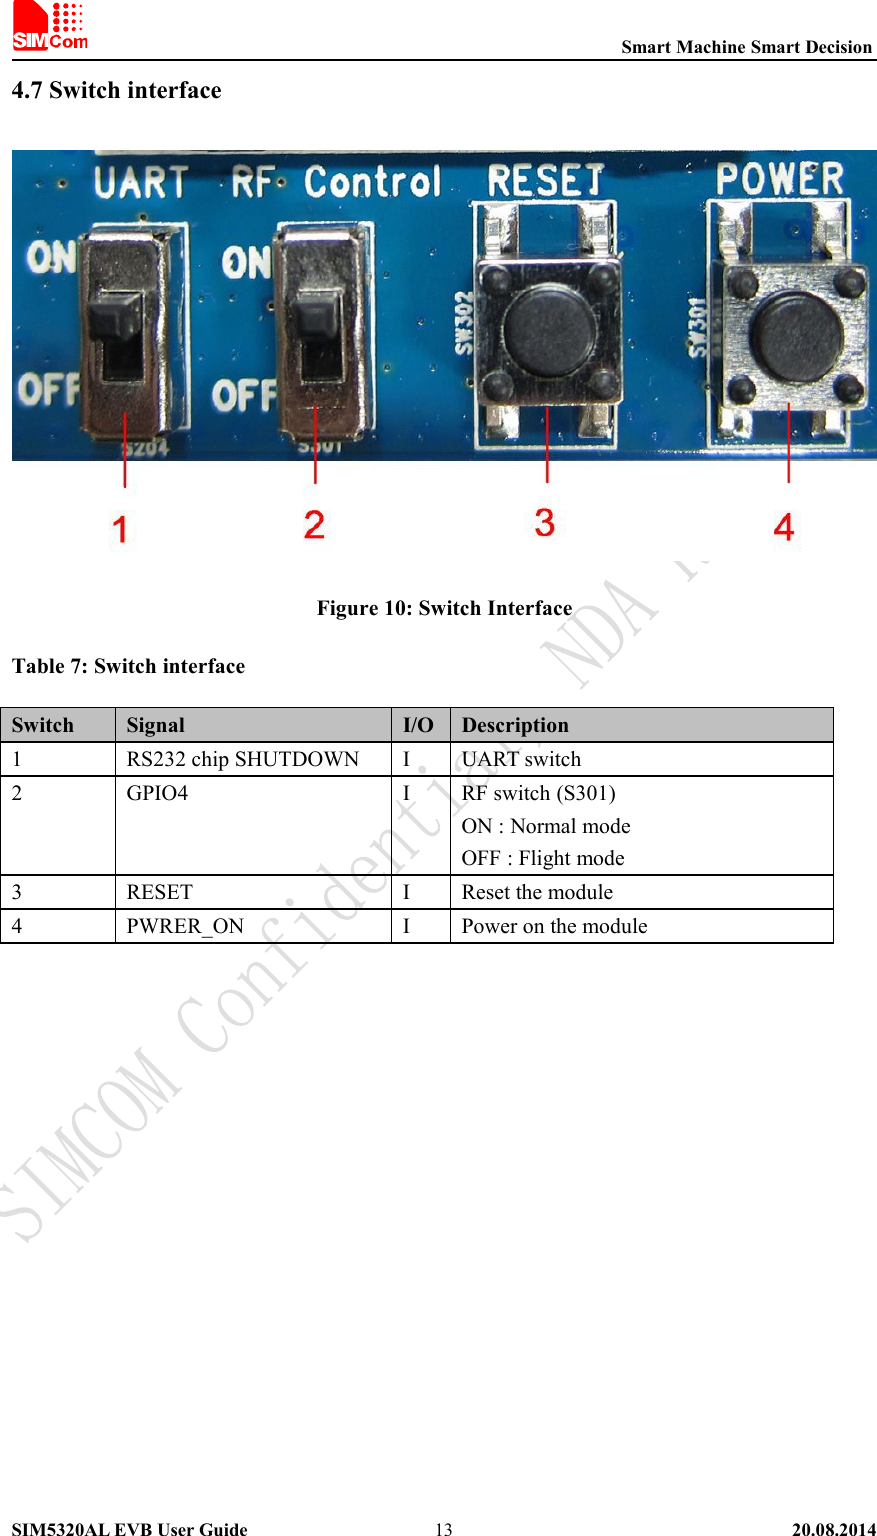 Smart Machine Smart DecisionSIM5320AL EVB User Guide 20.08.2014134.7 Switch interfaceFigure 10: Switch InterfaceTable 7: Switch interfaceSwitch Signal I/O Description1 RS232 chip SHUTDOWN I UART switch2 GPIO4 I RF switch (S301)ON : Normal modeOFF : Flight mode3 RESET I Reset the module4 PWRER_ON I Power on the module